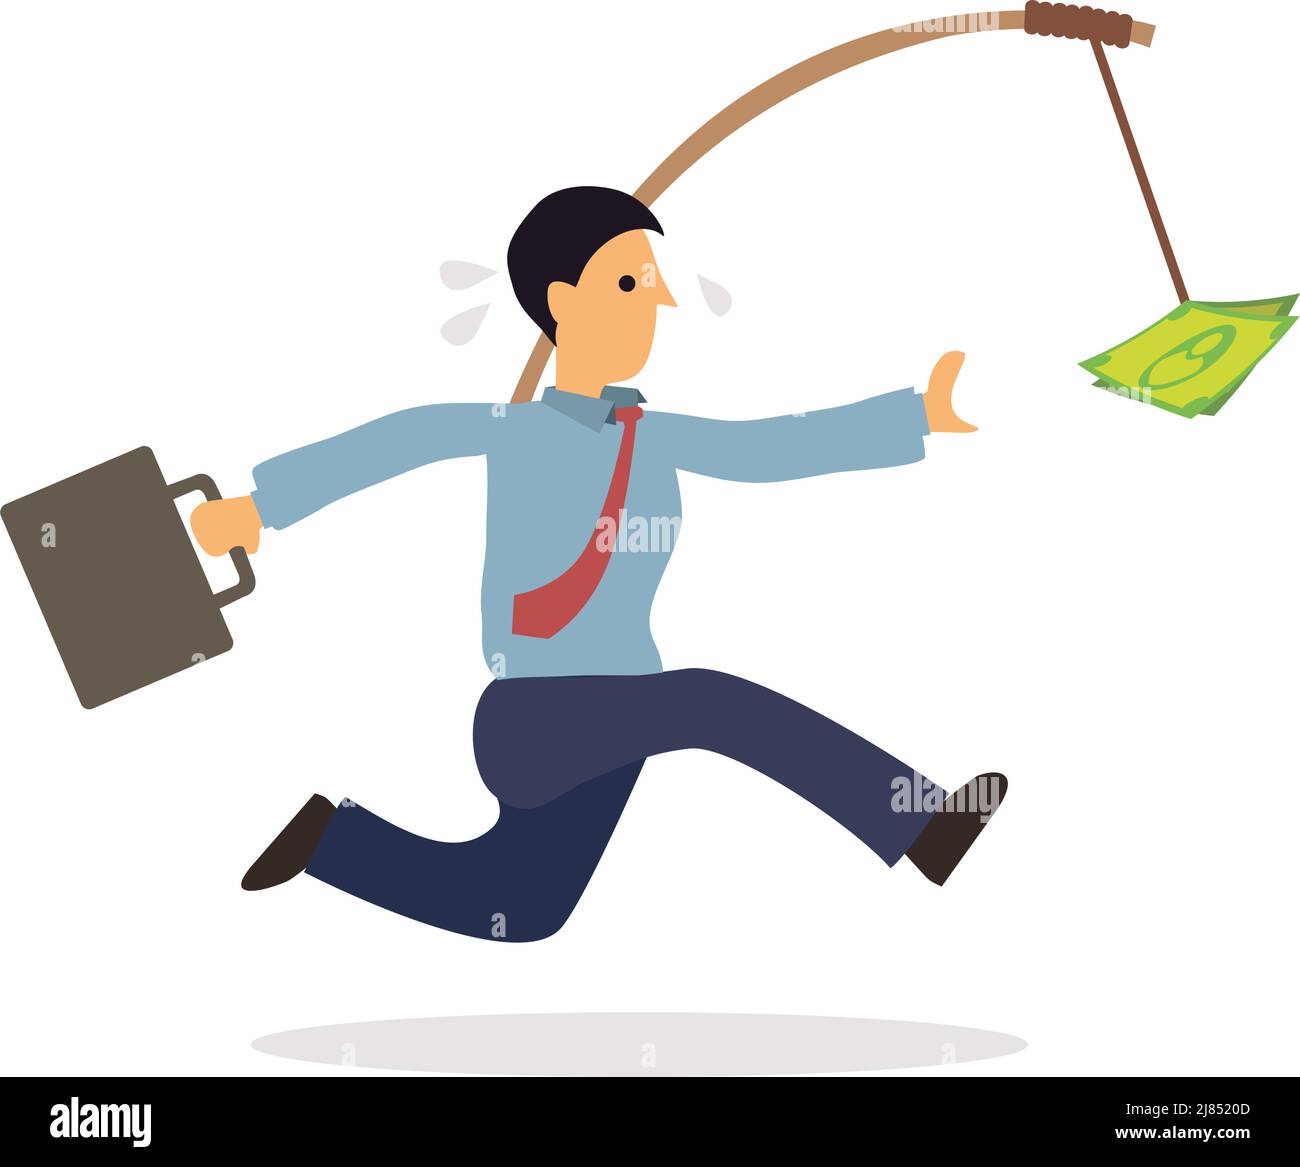 Businessman runs for money. Concept for rat race or greed. Flat cartoon character vector illustration isolated on white background. Stock Vector